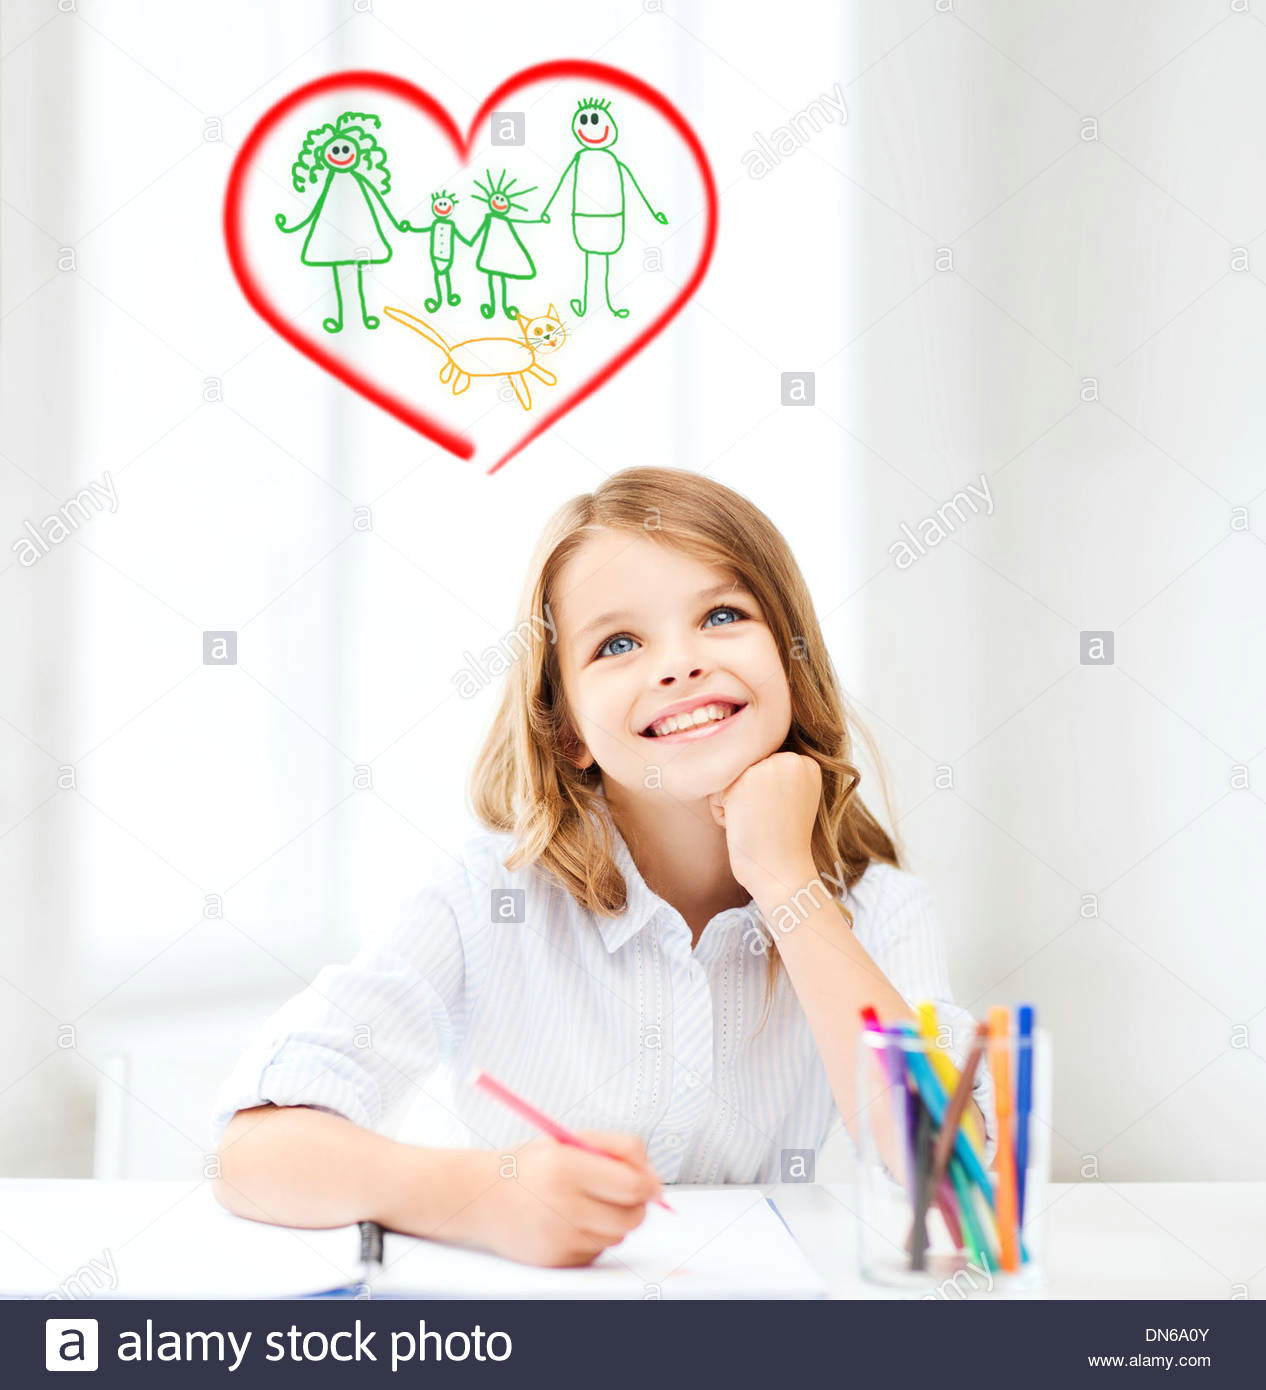 smiling little student girl drawing at school